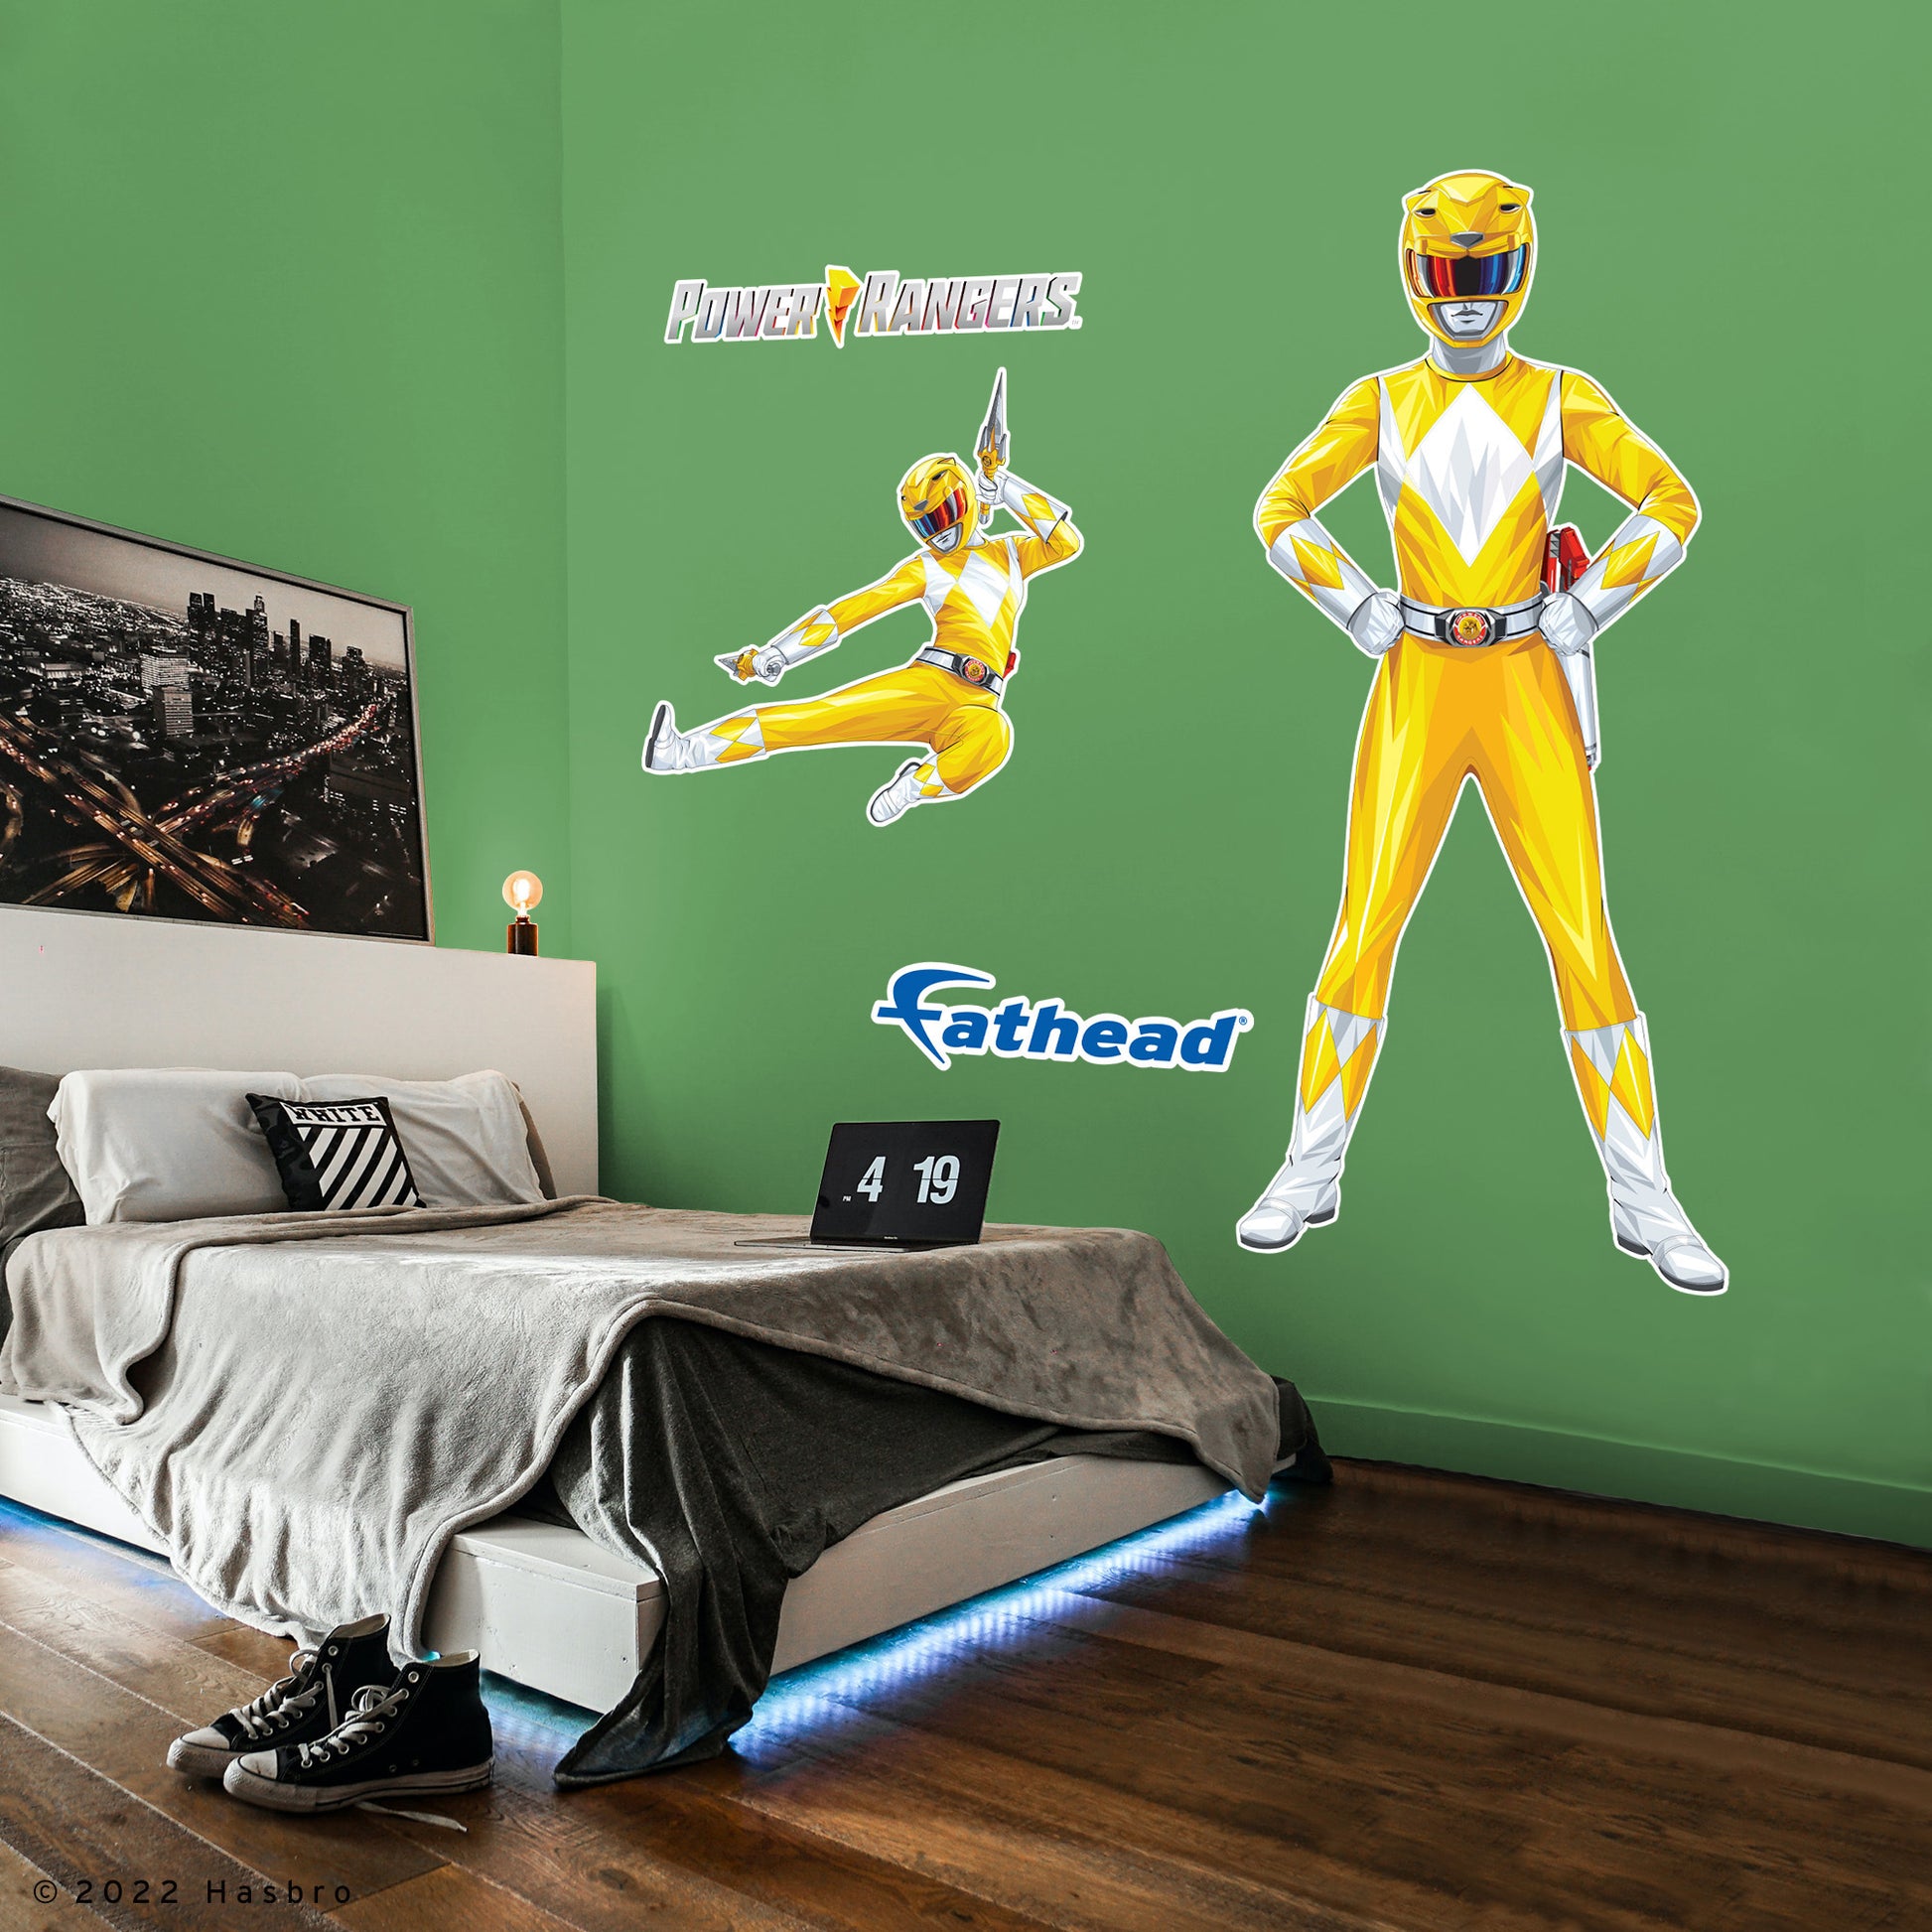 Life-Size Character +3 Decals (34"W x 74.5"H)